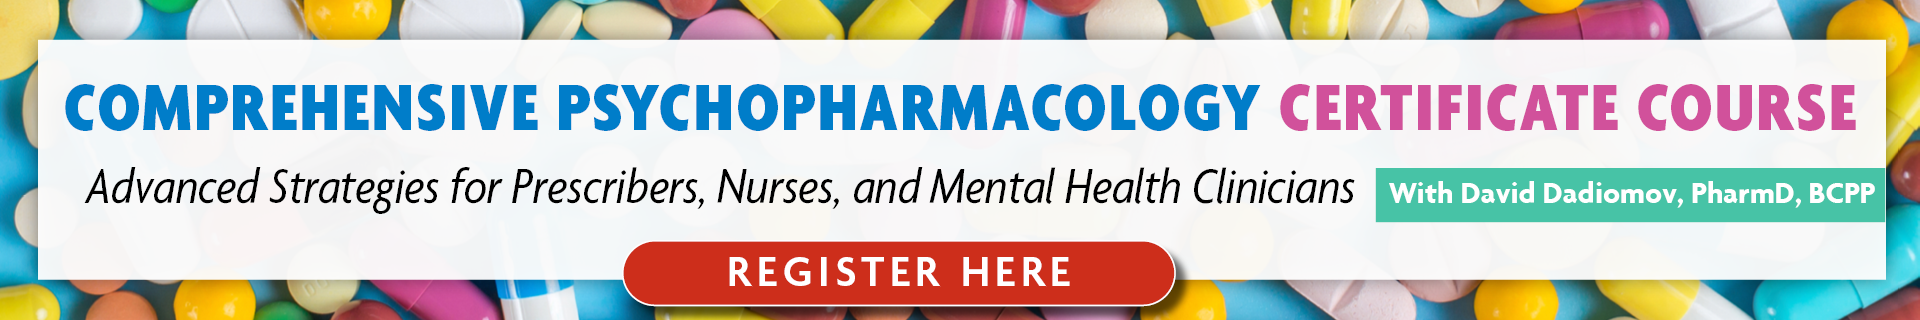 Comprehensive Psychopharmacology Certificate Course